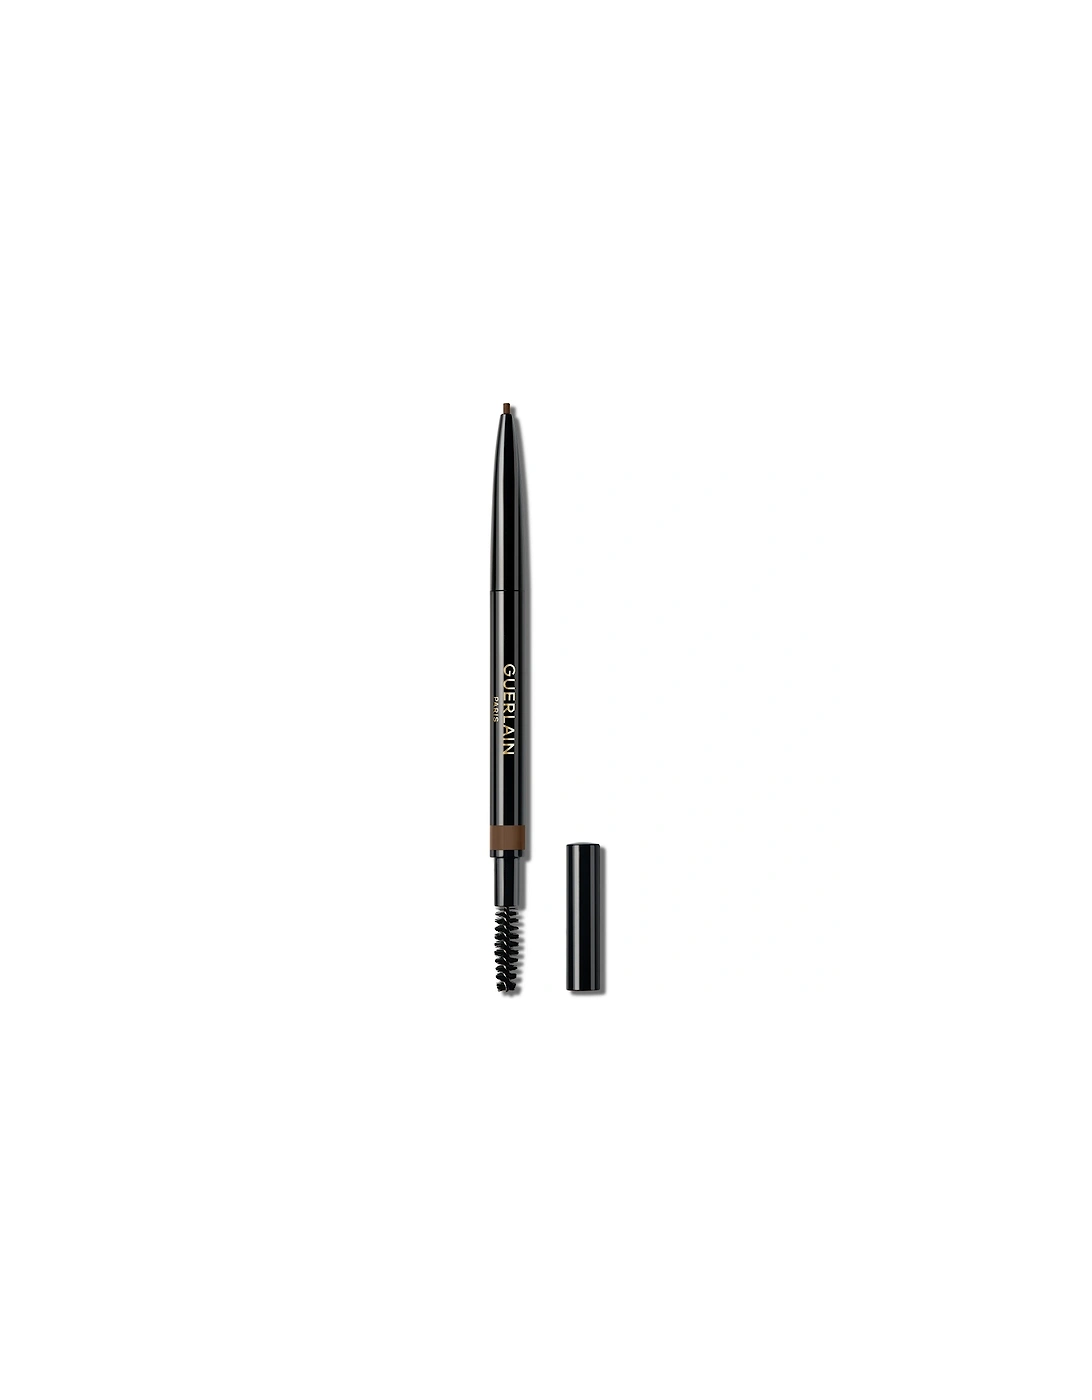 Brow G High Precision and Long Wear Brow Pencil - 04 Dark Brown, 2 of 1